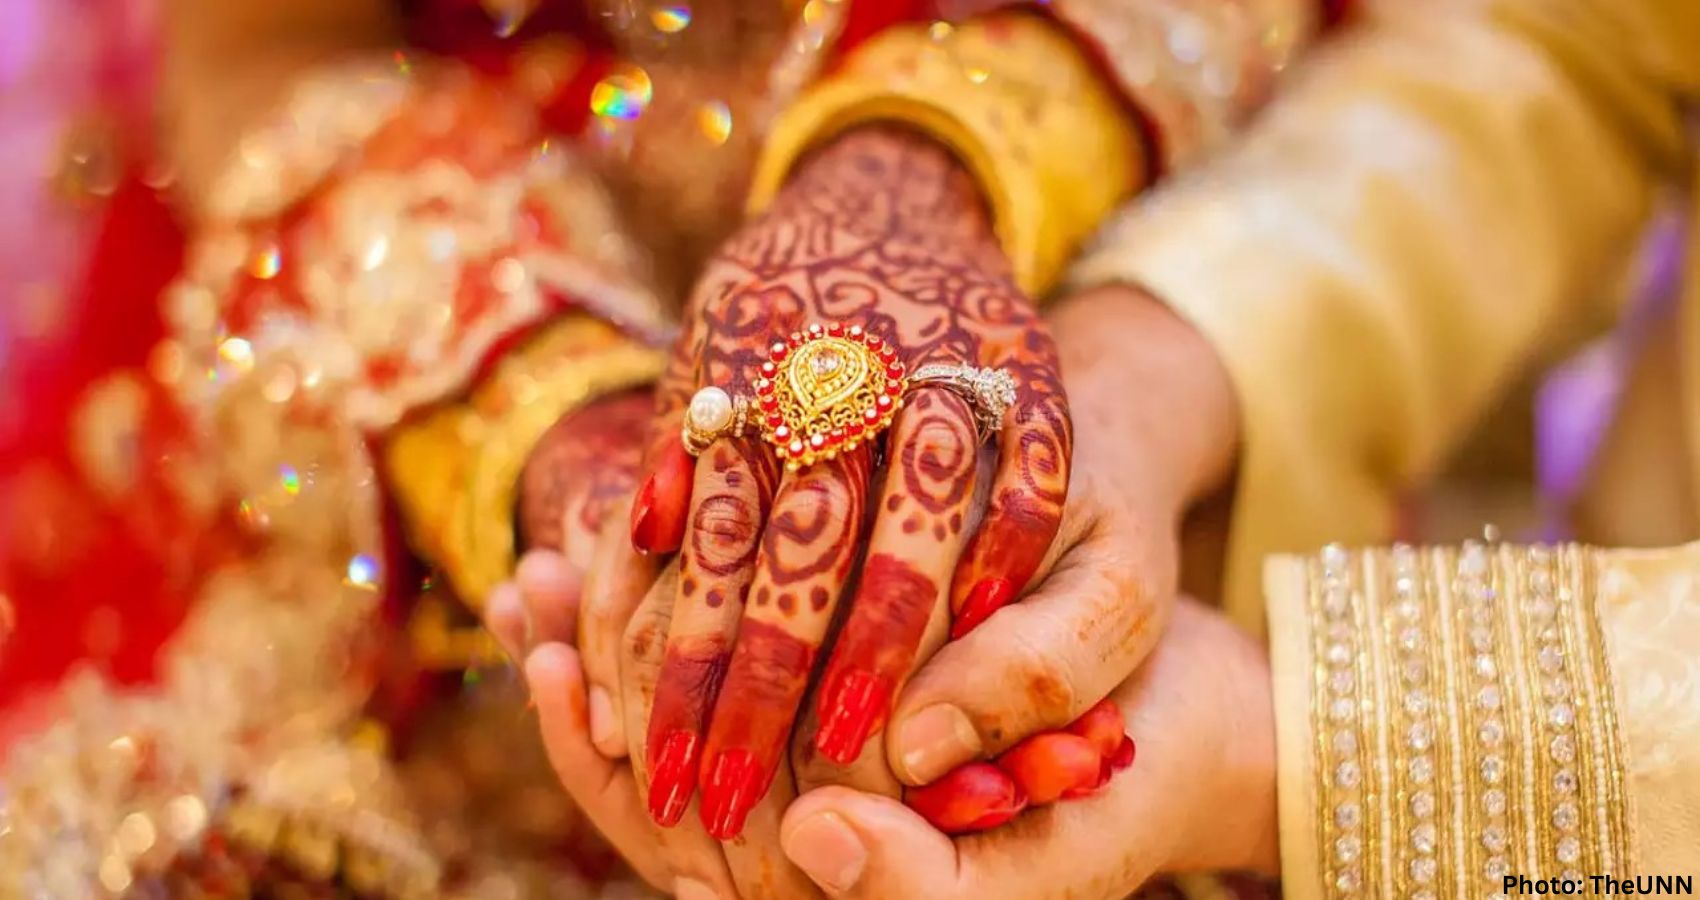 New Proposals For NRIs To Curb Marriage Fraud: Compulsory Registration In India